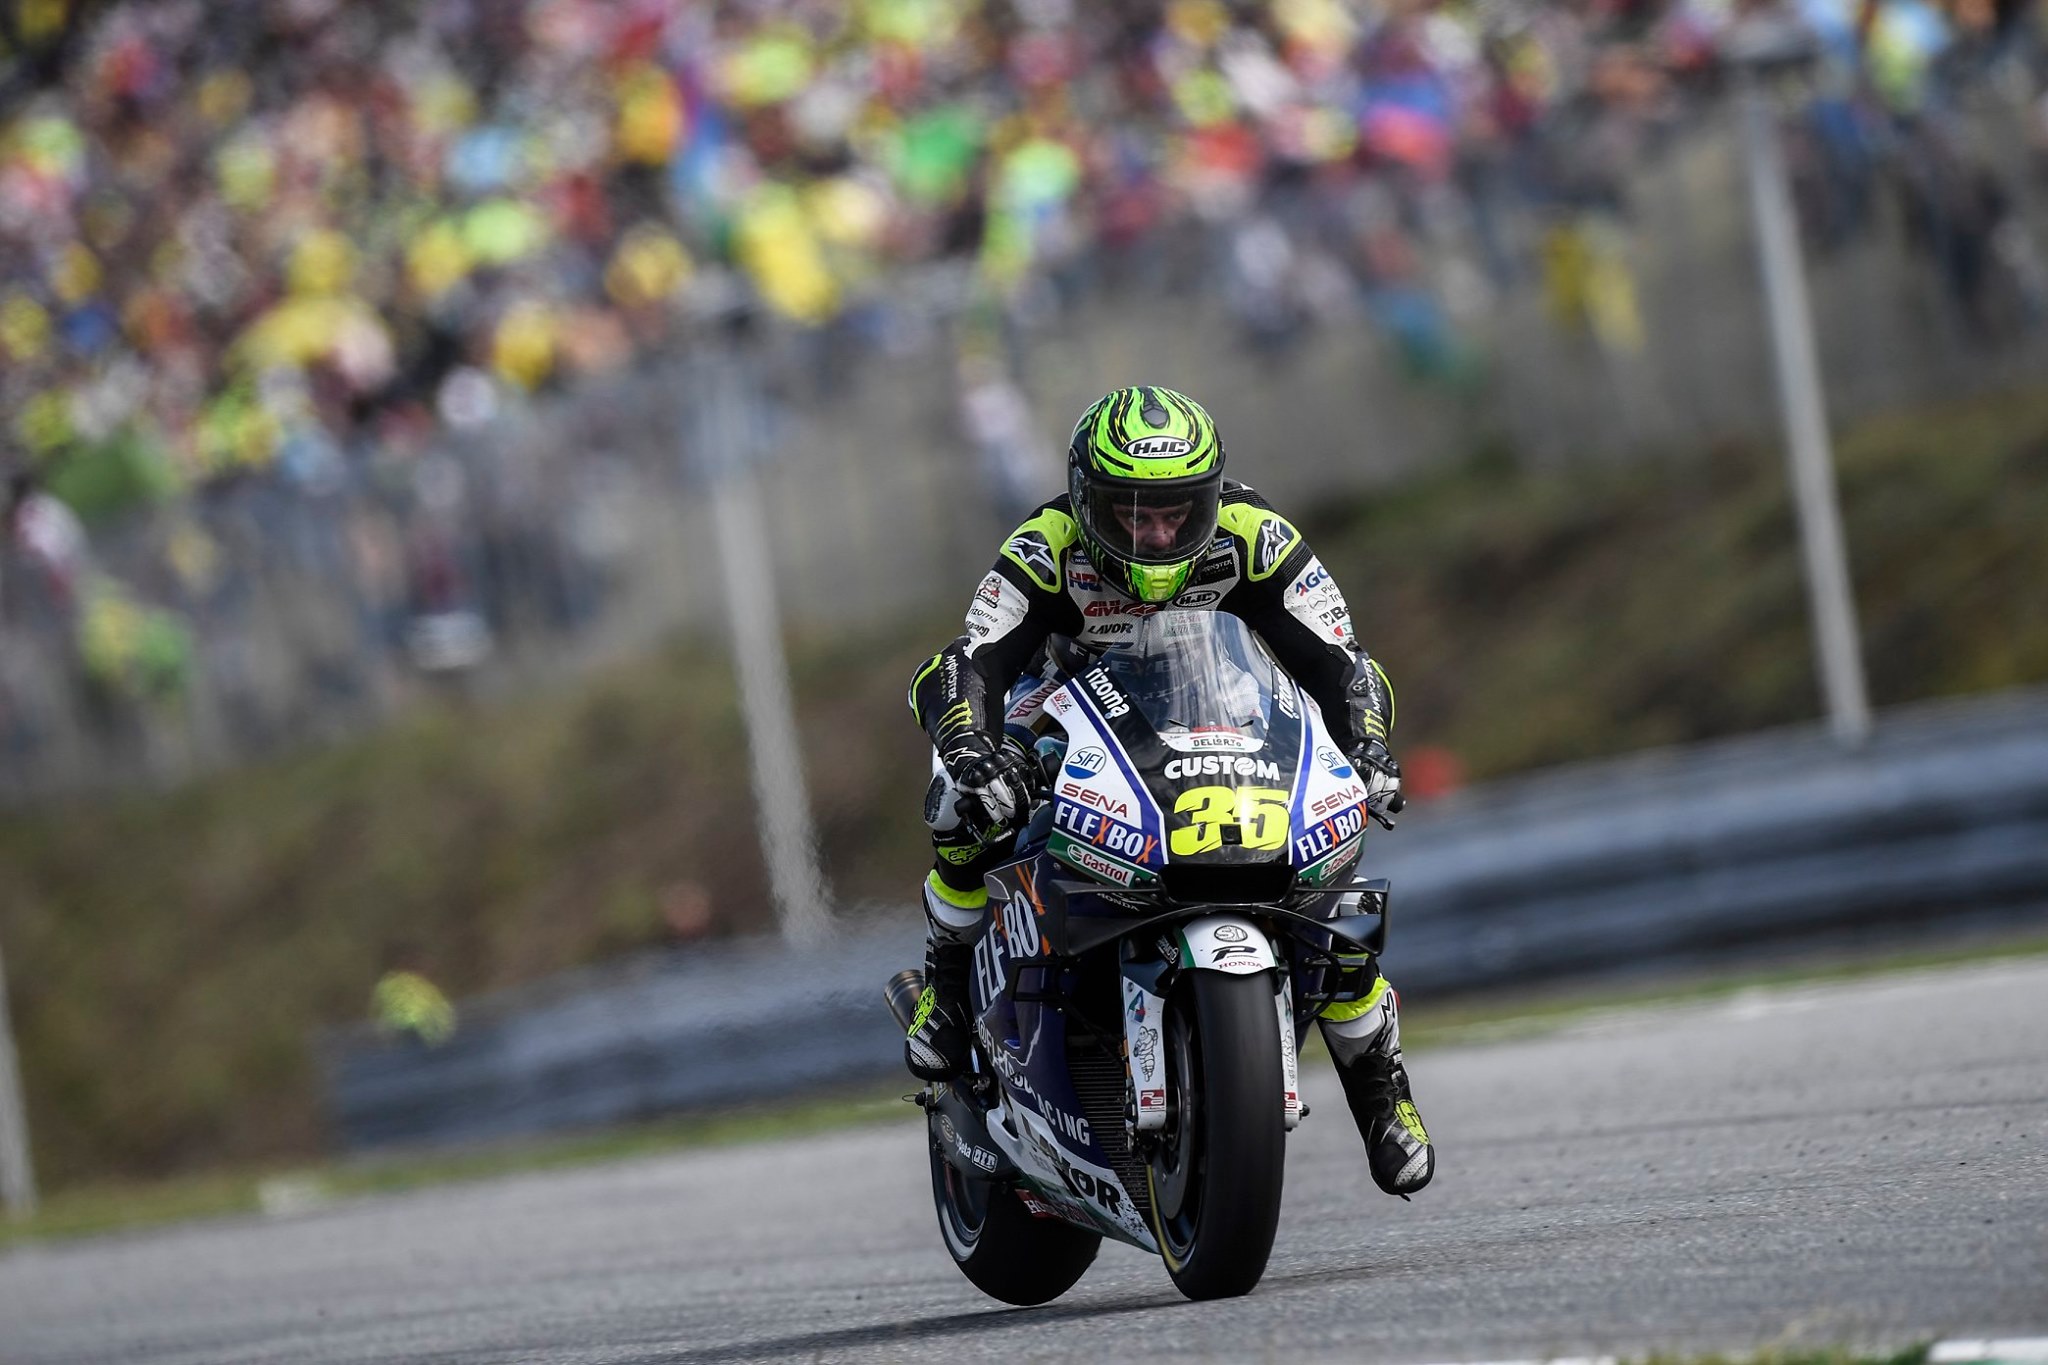 Crutchlow satisfied with fifth place in Brno